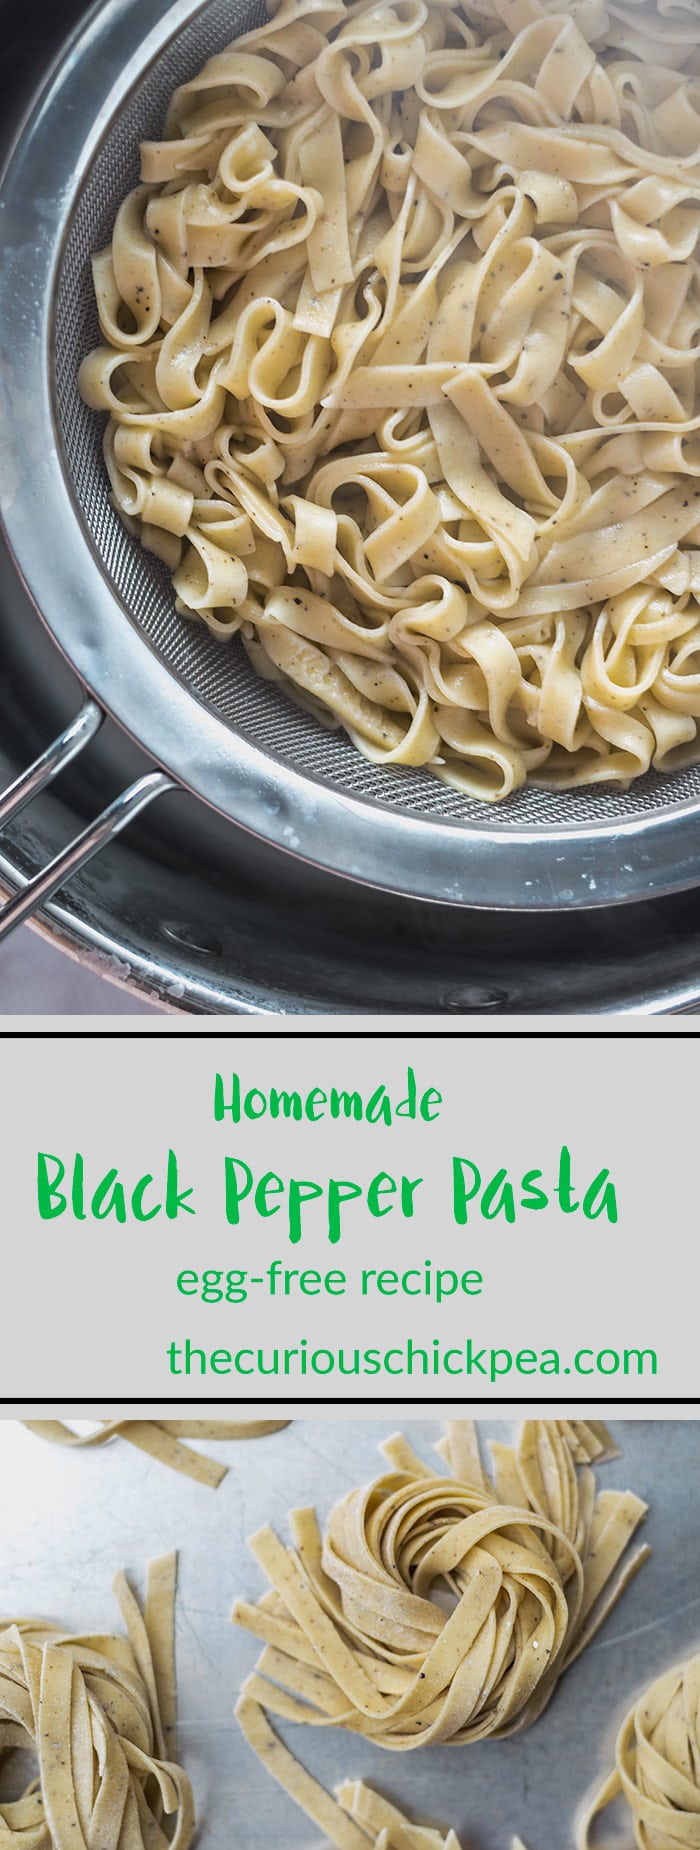 Homemade Black Pepper Pasta | Egg-Free, Vegan. This easy homemade pasta is made vegan with aquafaba instead of eggs. Black pepper makes the pasta extra tasty, and it cooks up toothsome and delicious! | thecuriouschickpea.com #vegan #pasta #homemade